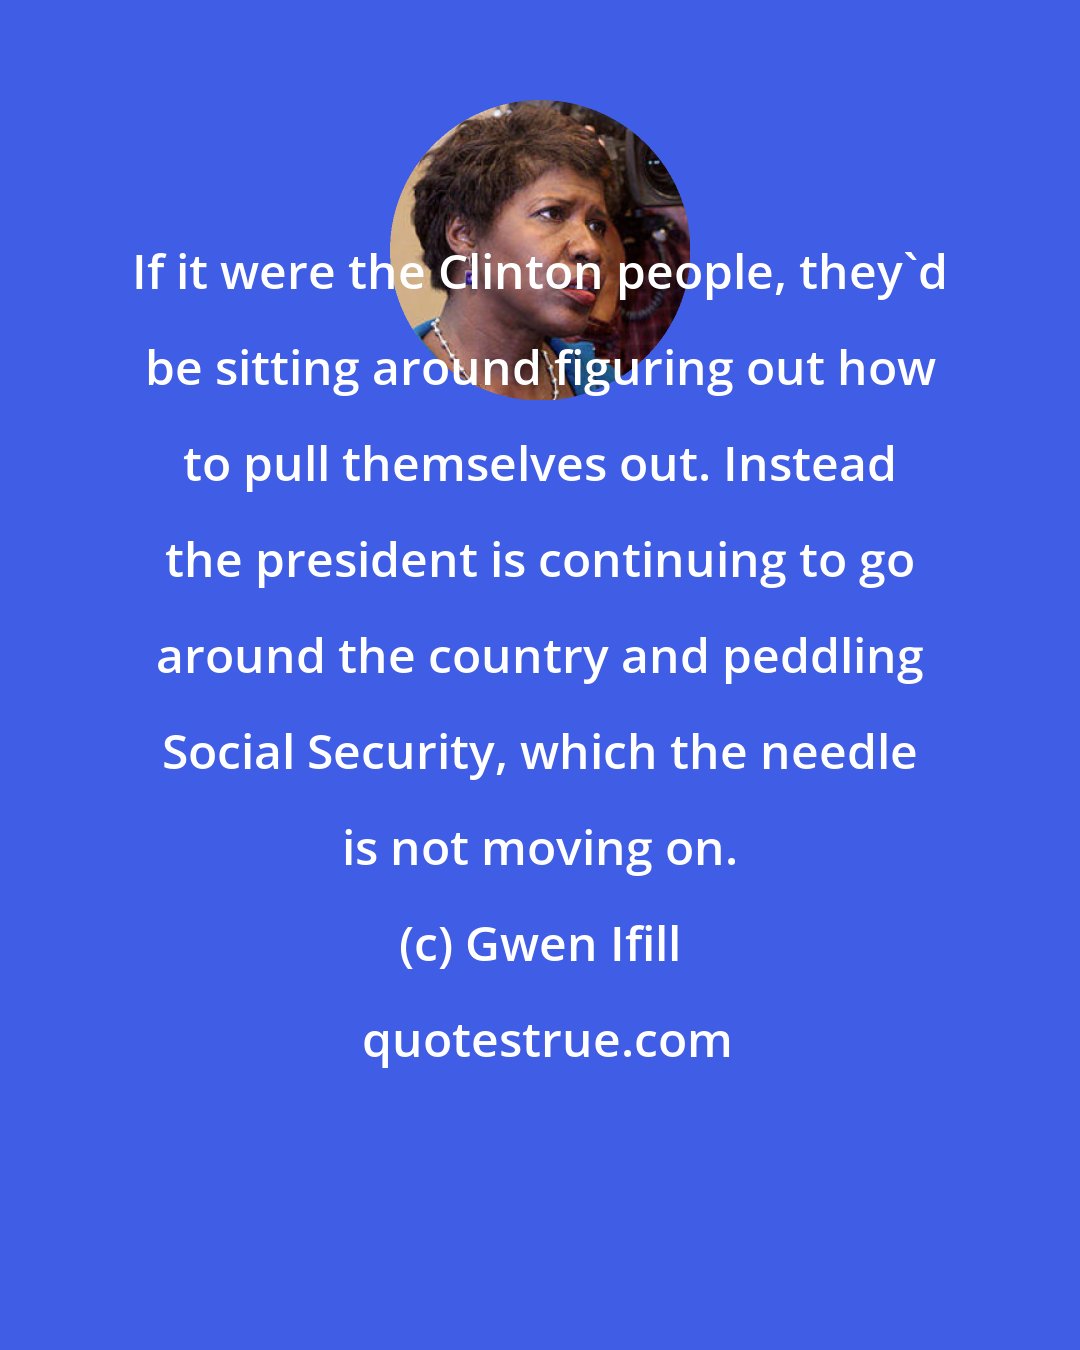 Gwen Ifill: If it were the Clinton people, they'd be sitting around figuring out how to pull themselves out. Instead the president is continuing to go around the country and peddling Social Security, which the needle is not moving on.